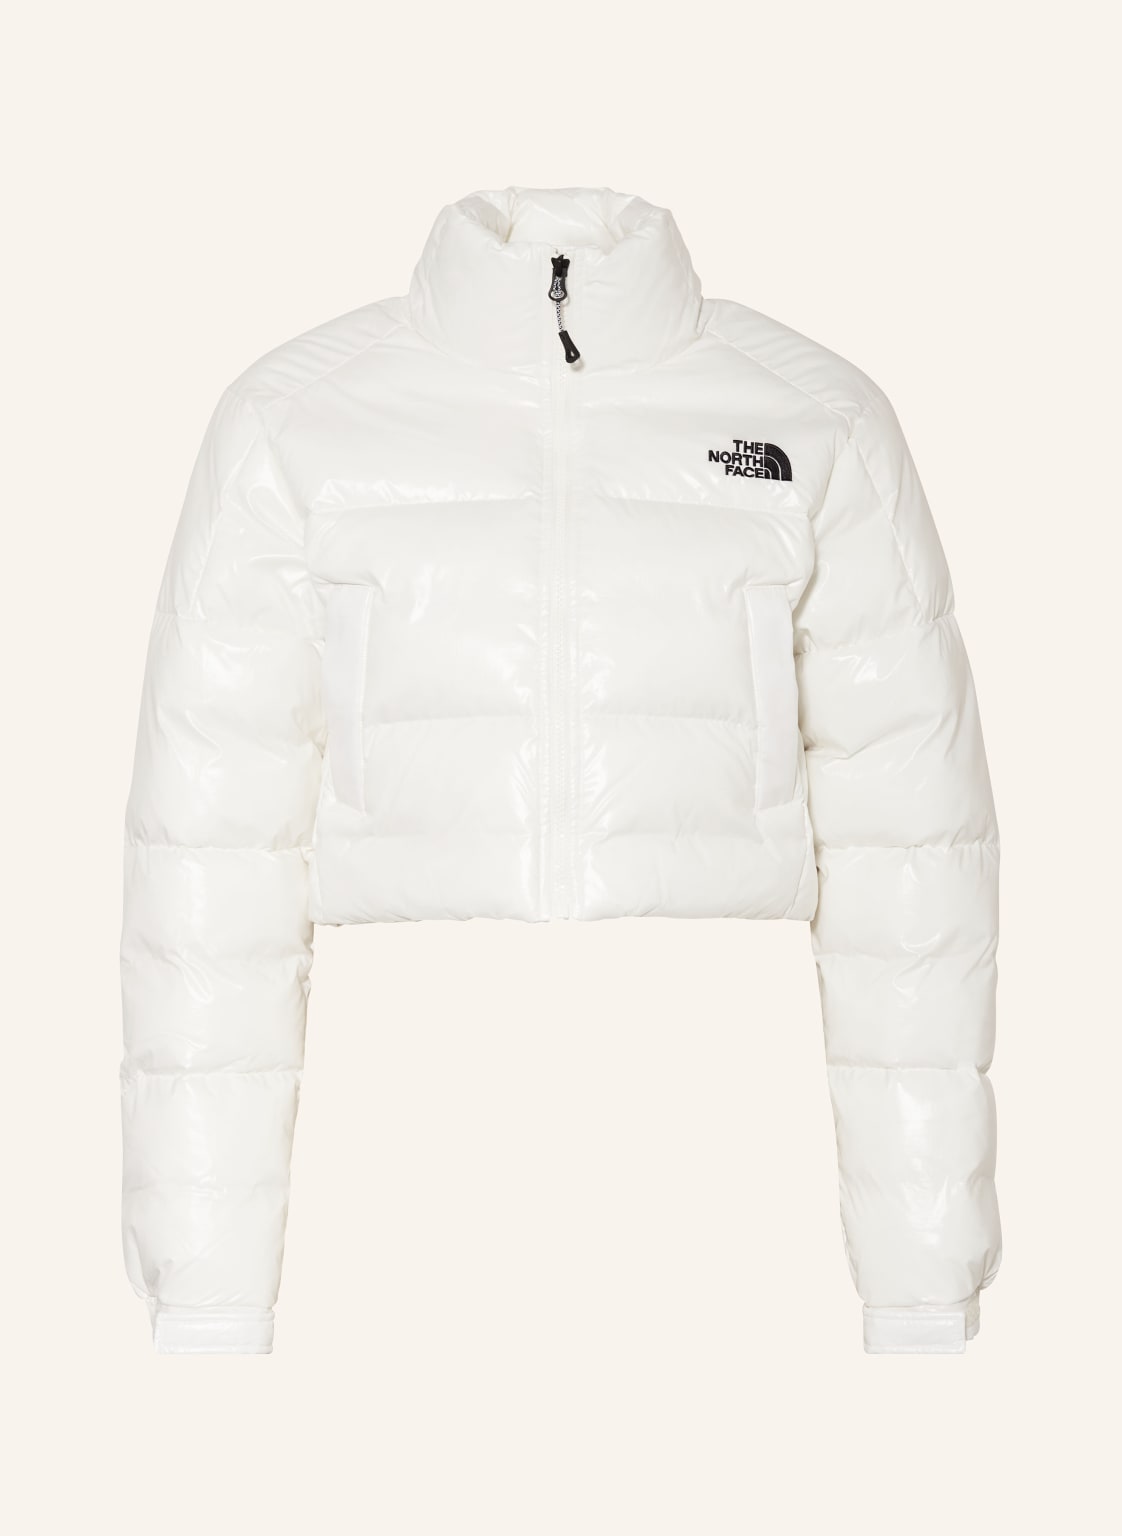 The North Face Cropped-Steppjacke Rusta 2.0 weiss von The North Face